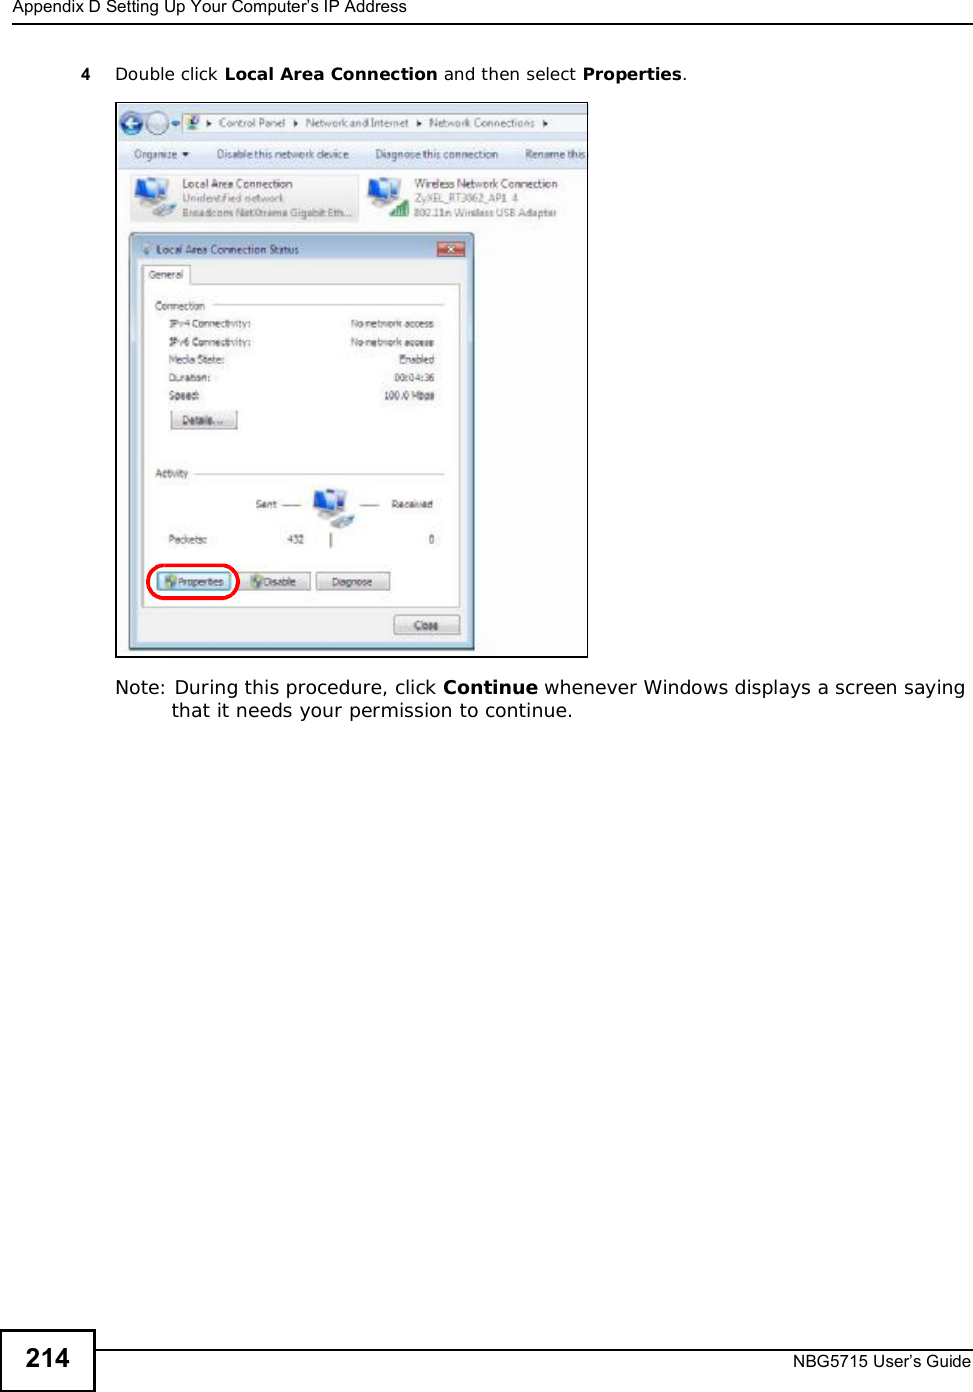 Appendix DSetting Up Your Computer’s IP AddressNBG5715 User’s Guide2144Double click Local Area Connection and then select Properties.Note: During this procedure, click Continue whenever Windows displays a screen saying that it needs your permission to continue.